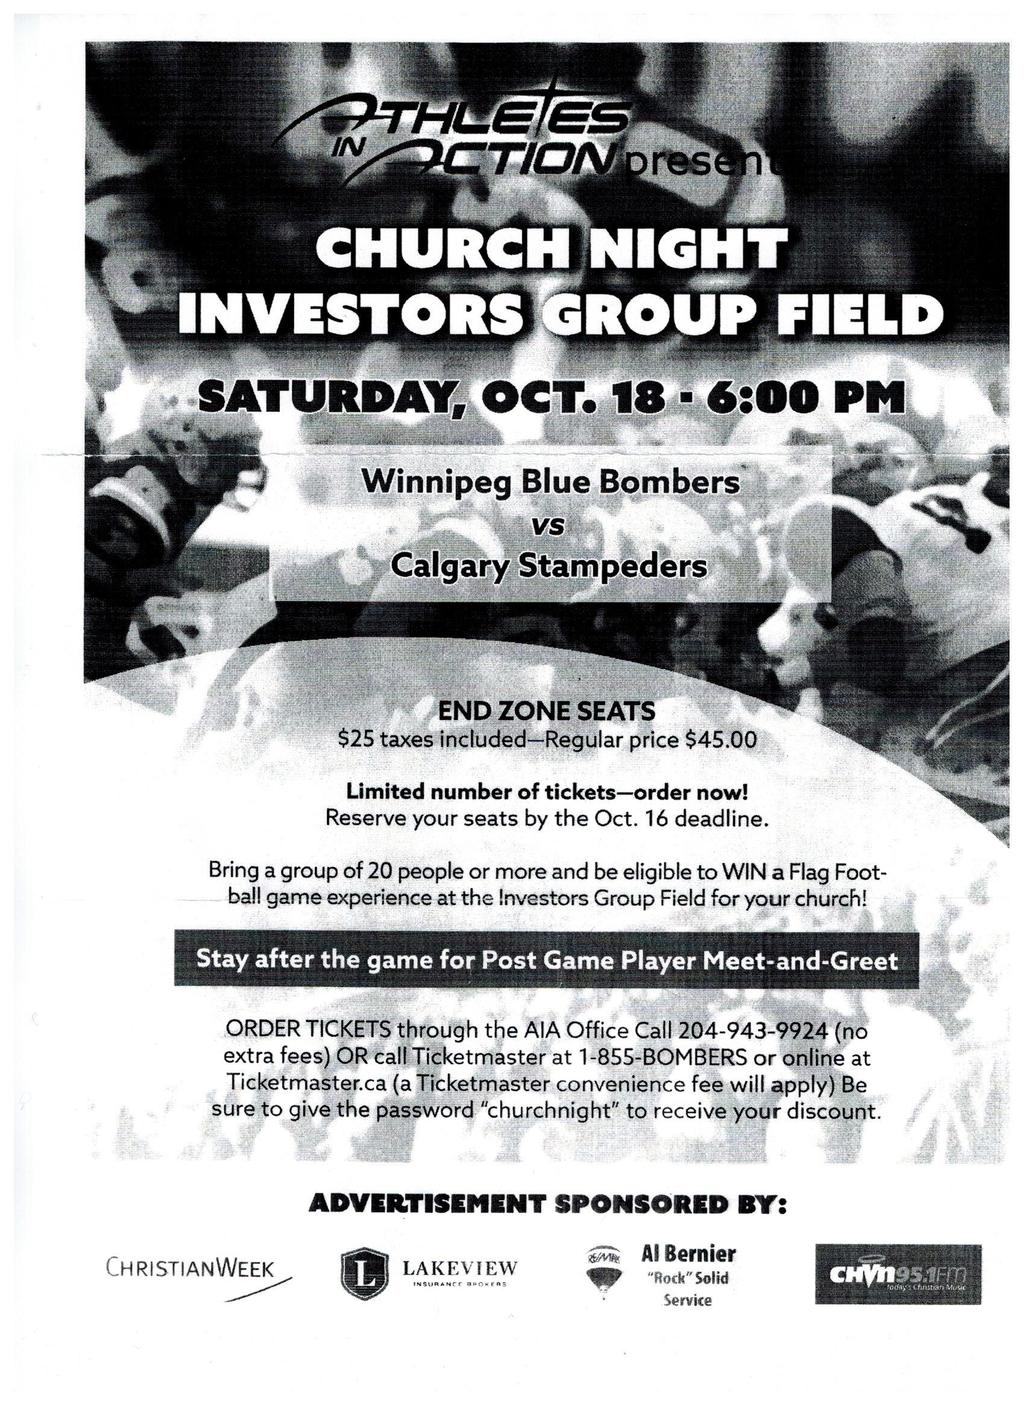 Church Night at Investers Group Field Everyone is invited to attend to fellowship with